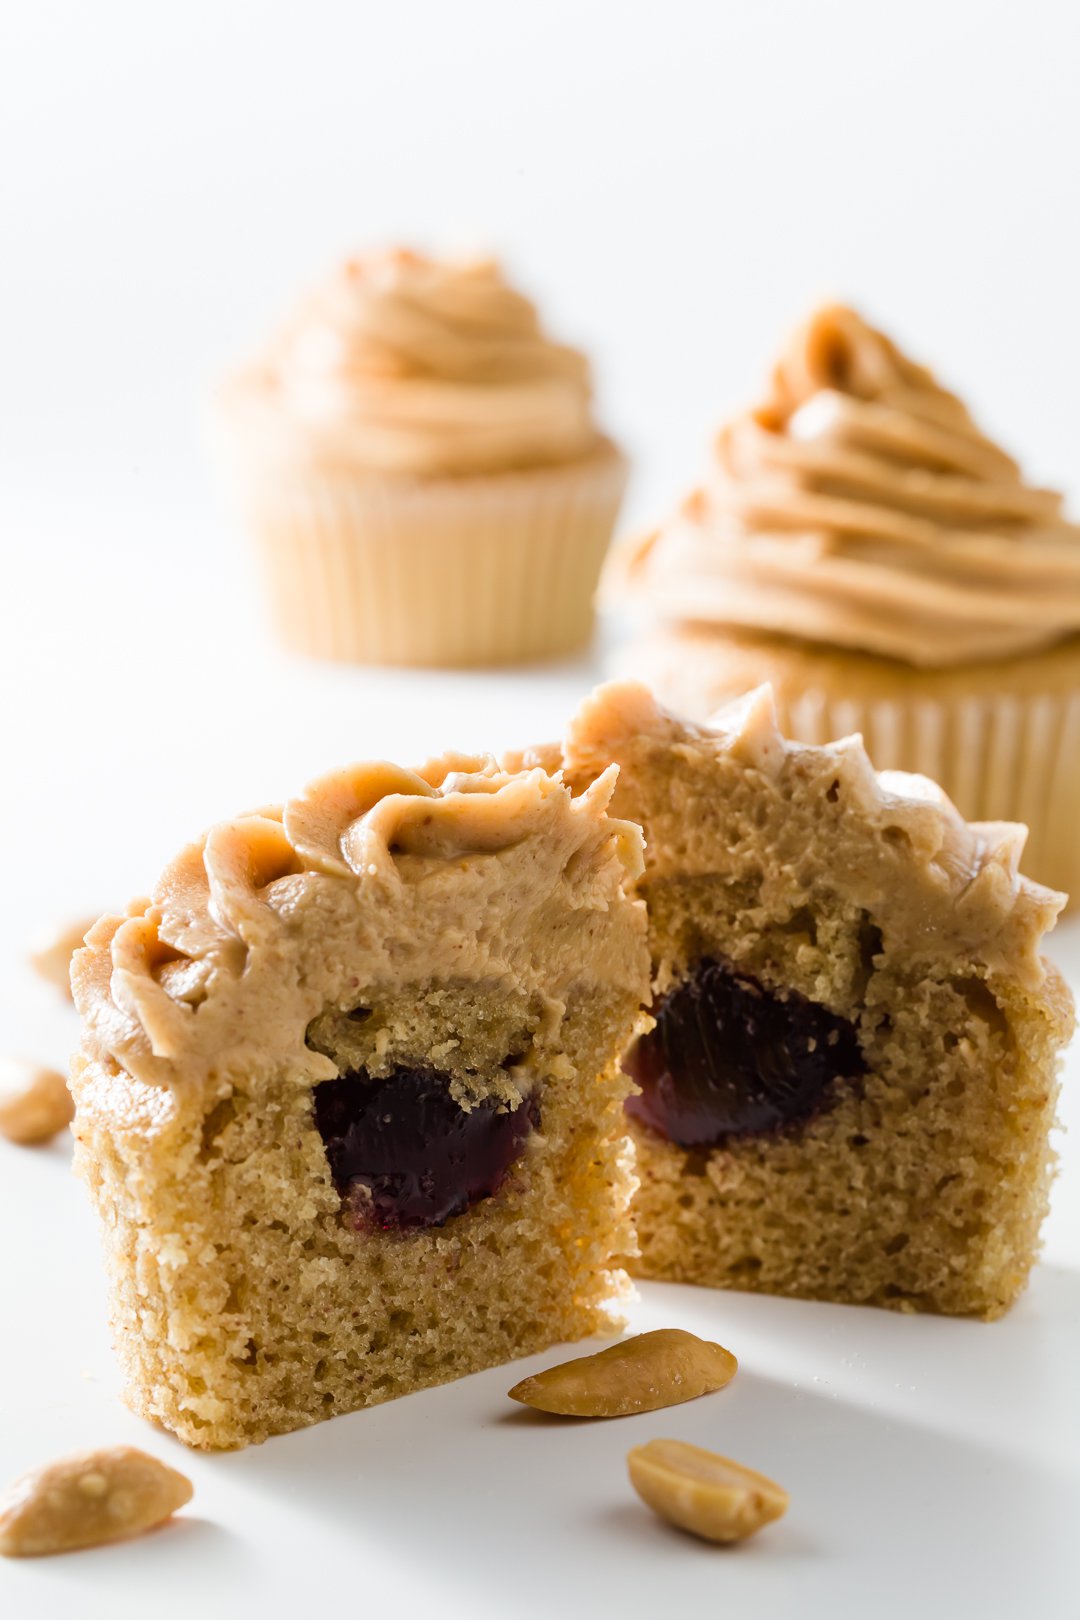 Peanut butter and jelly cupcake cut open